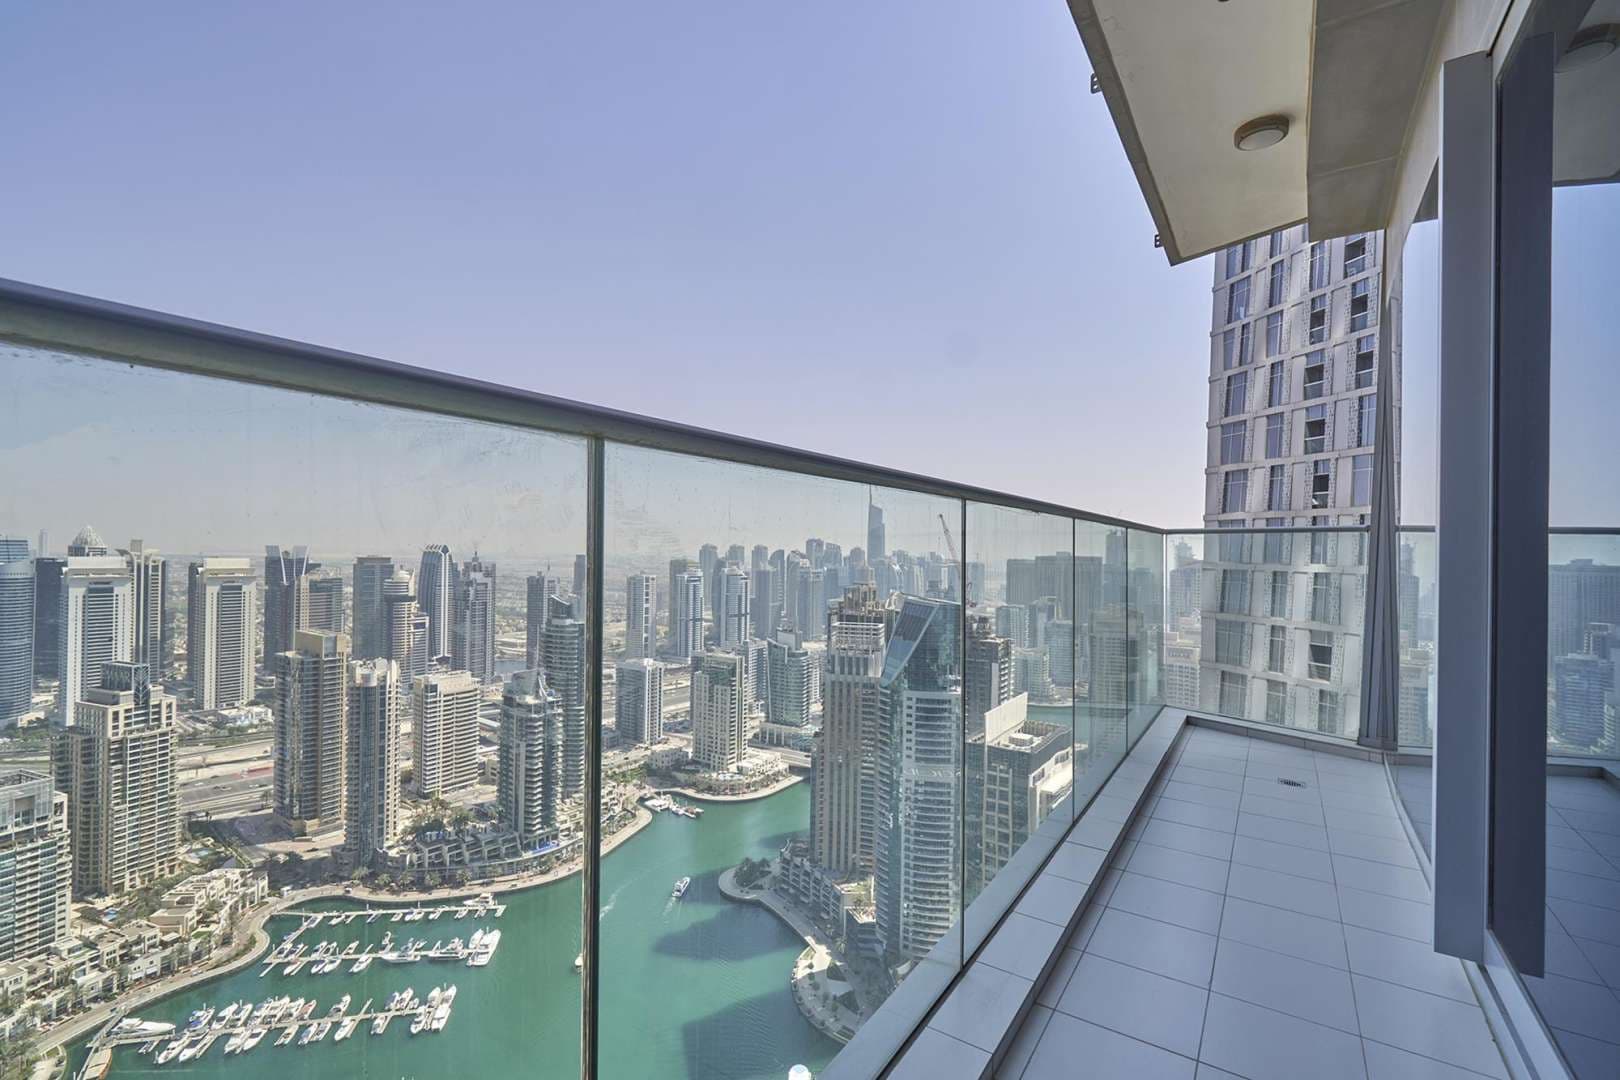 3 Bedroom Apartment For Rent Damac Heights Lp06537 30a9ed332e72740.jpg